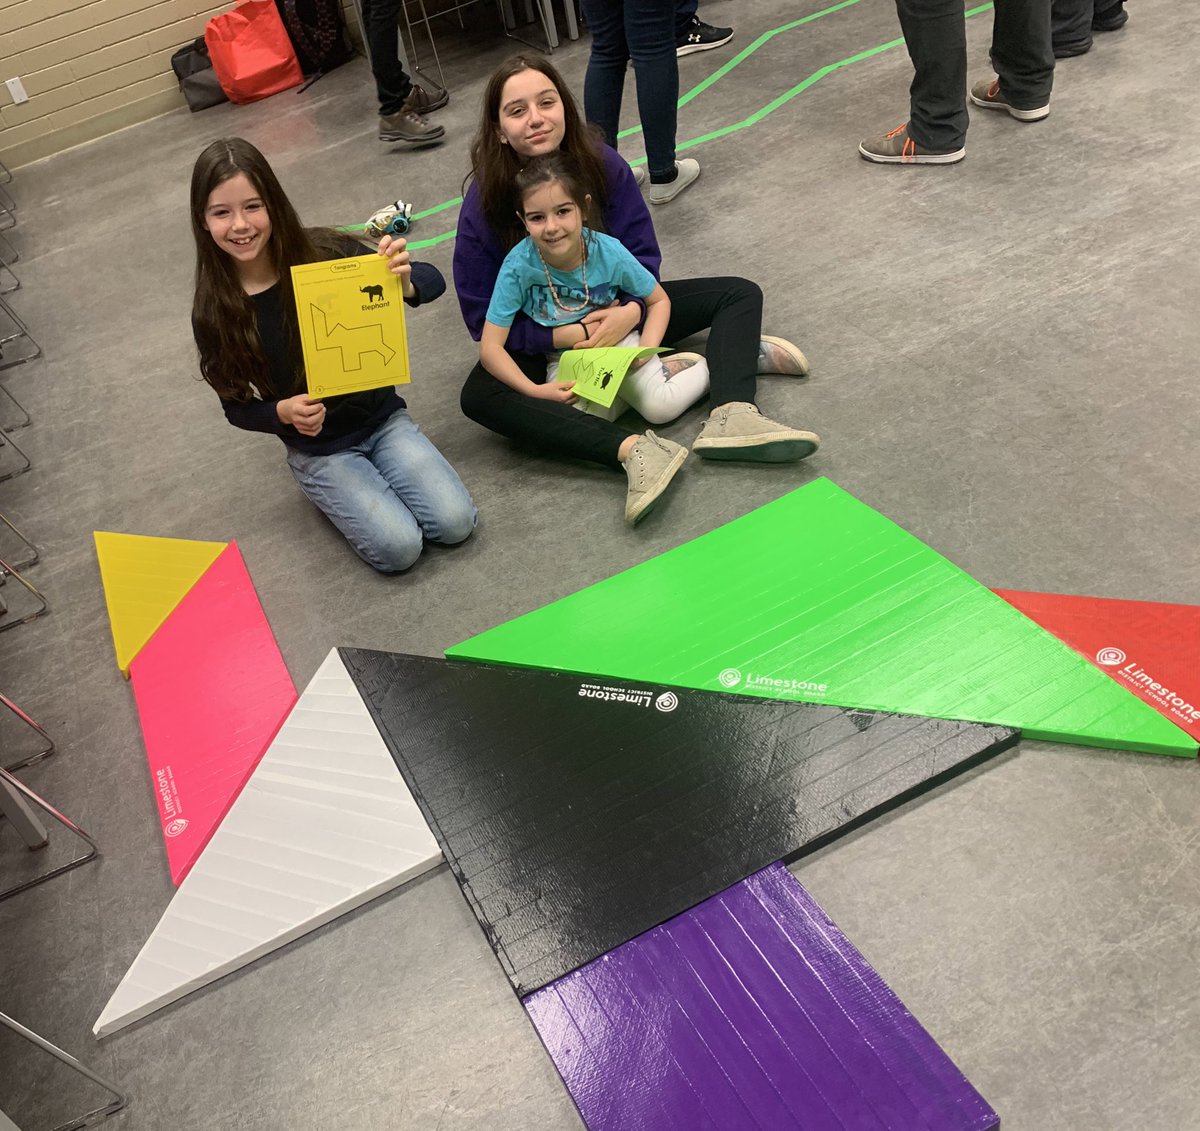 The OAME family math morning was a huge success. Wonderful to see so many kids and parents engaging in all the learning opportunities. Culinary skills, coding, math games, beading, 3D printing, tangrams and more! @OAMElearns @LimestoneDSB